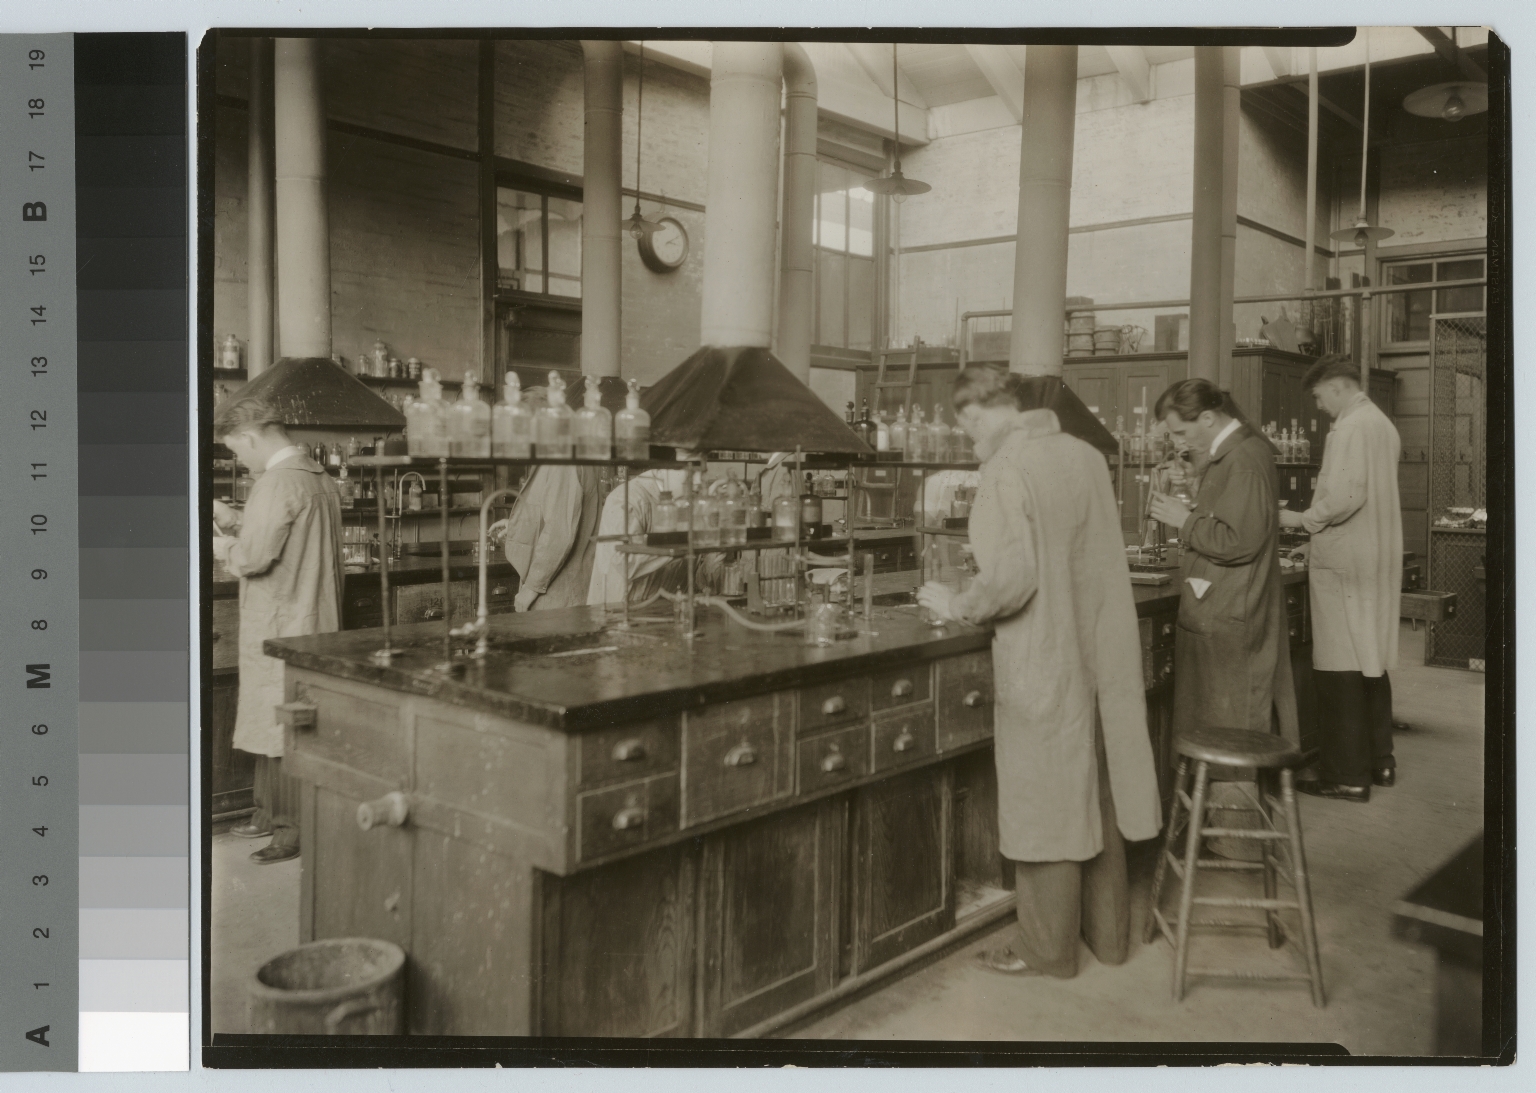 Academics, chemistry, Rochester Athenaeum and Mechanics Institute chemistry laboratory in the Eastman Building with male students working on experiments, [1920-1930]